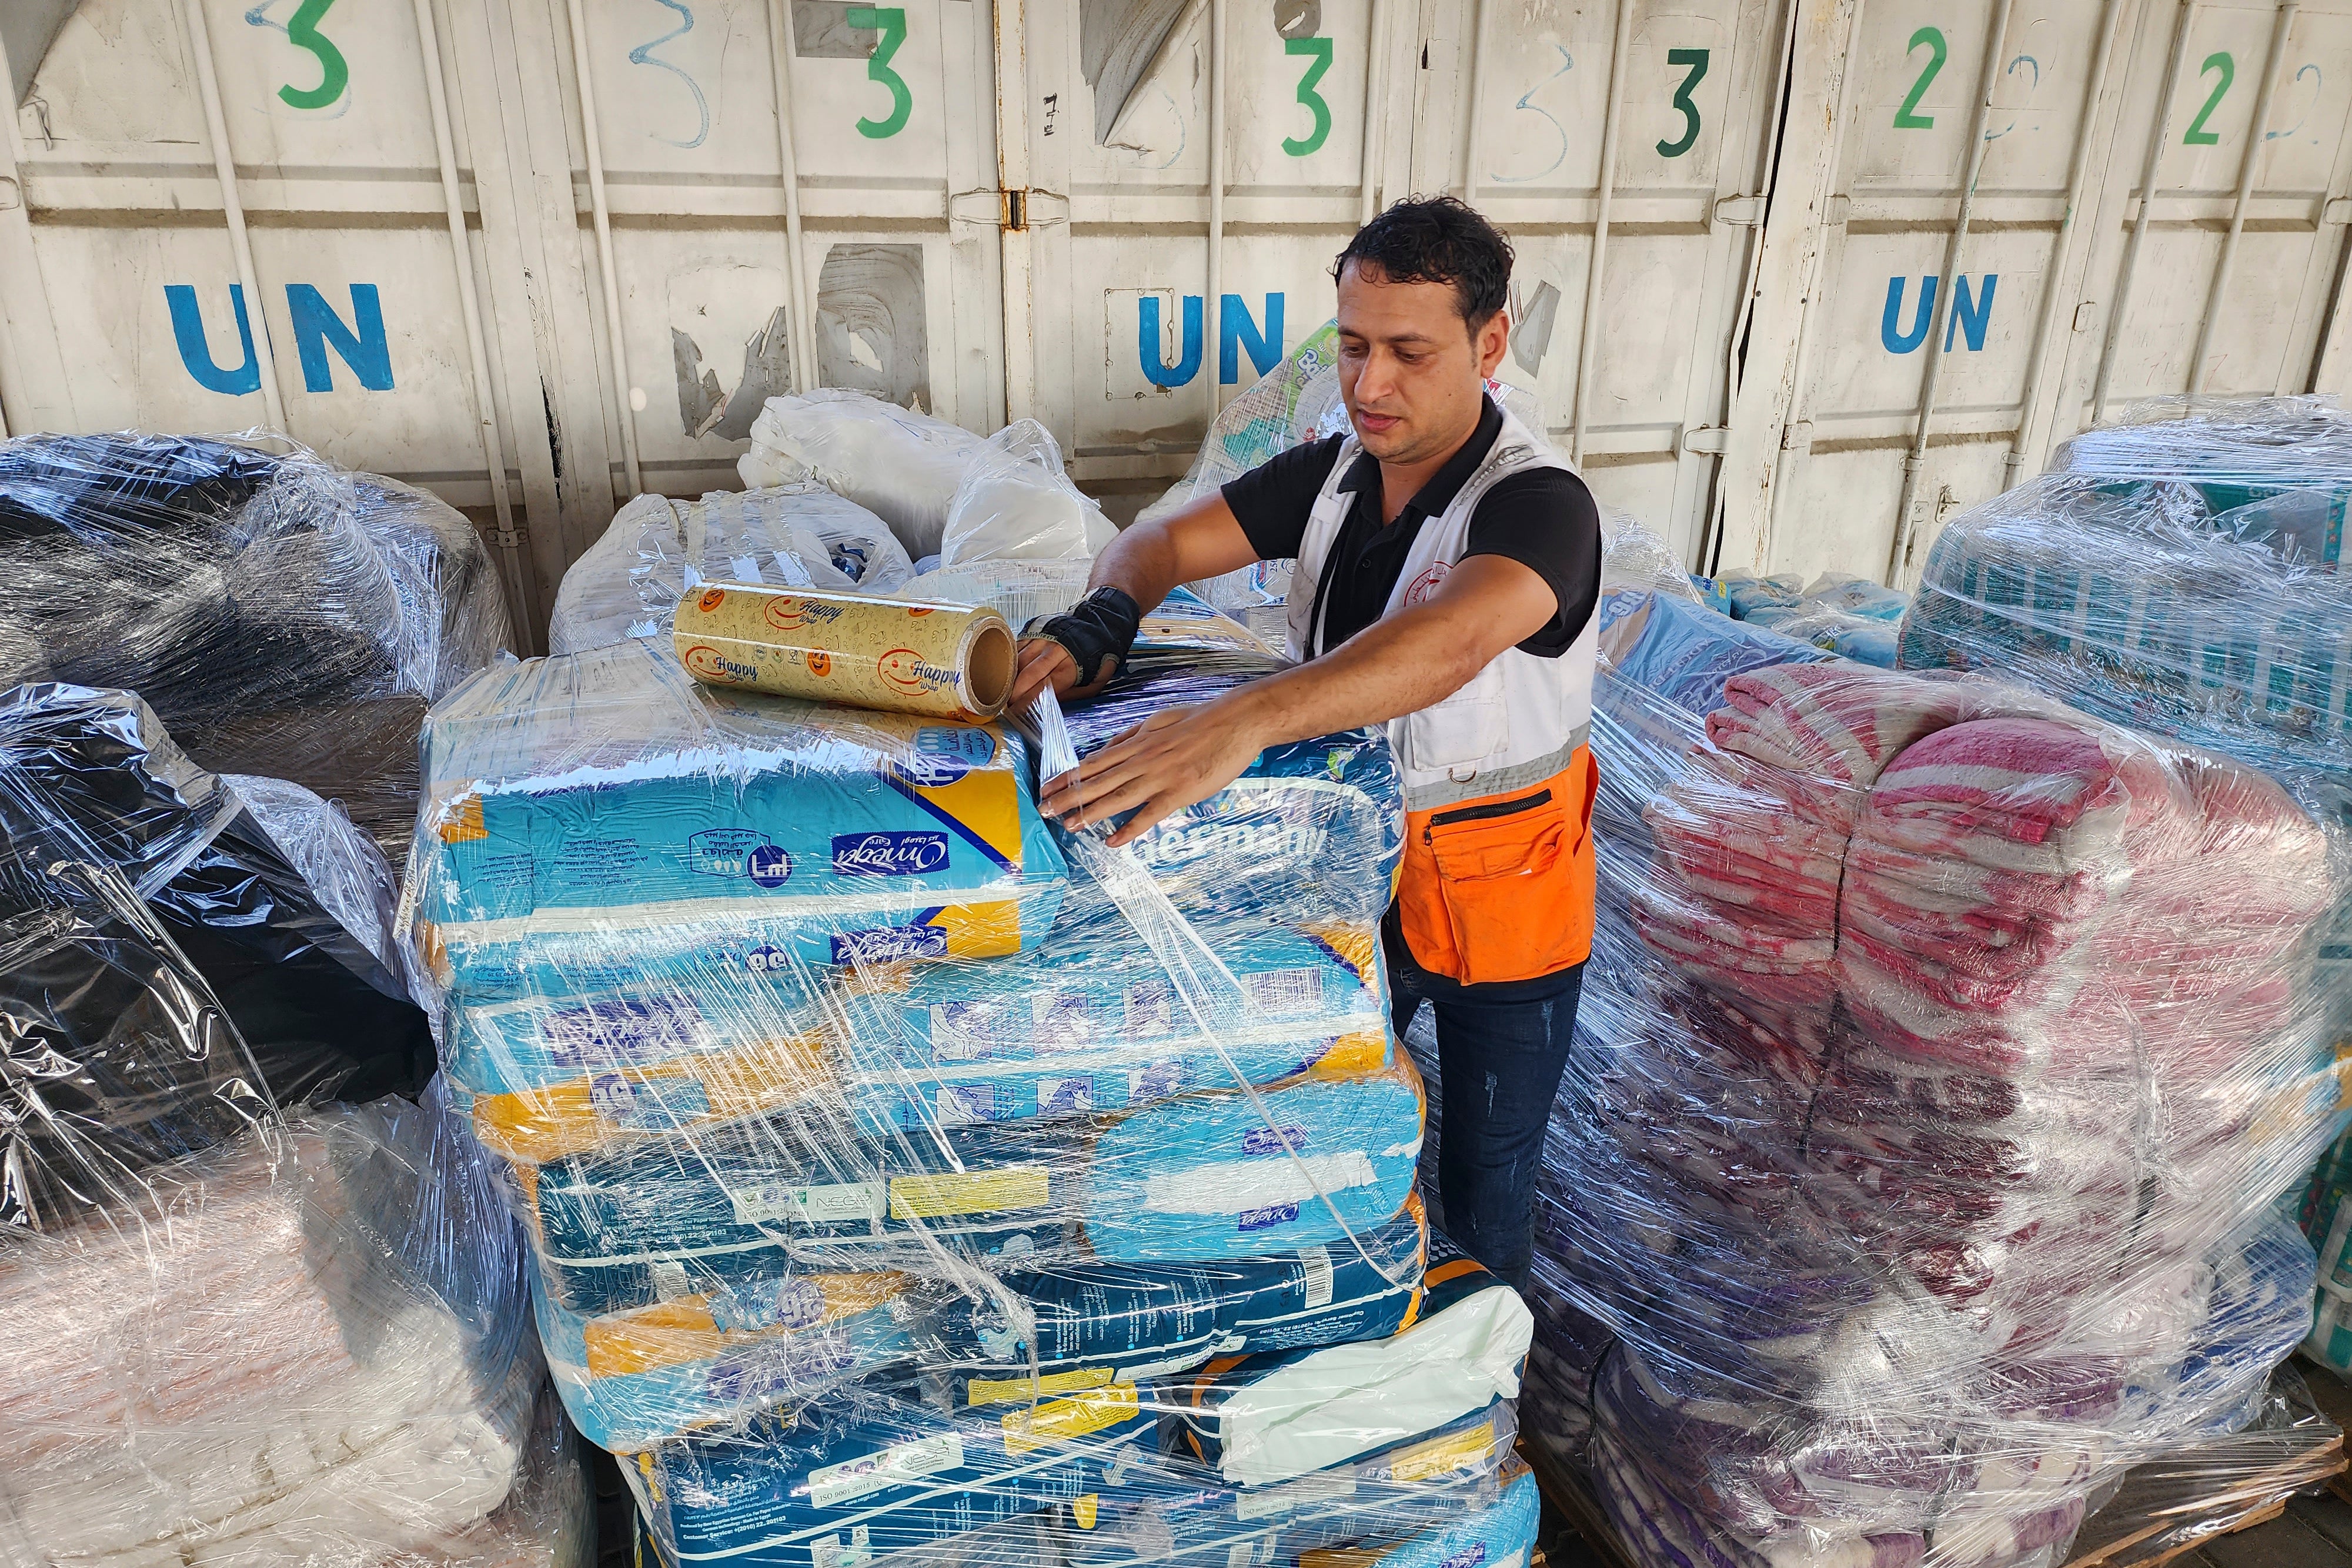 An UNRWA worker prepares to distribute aid